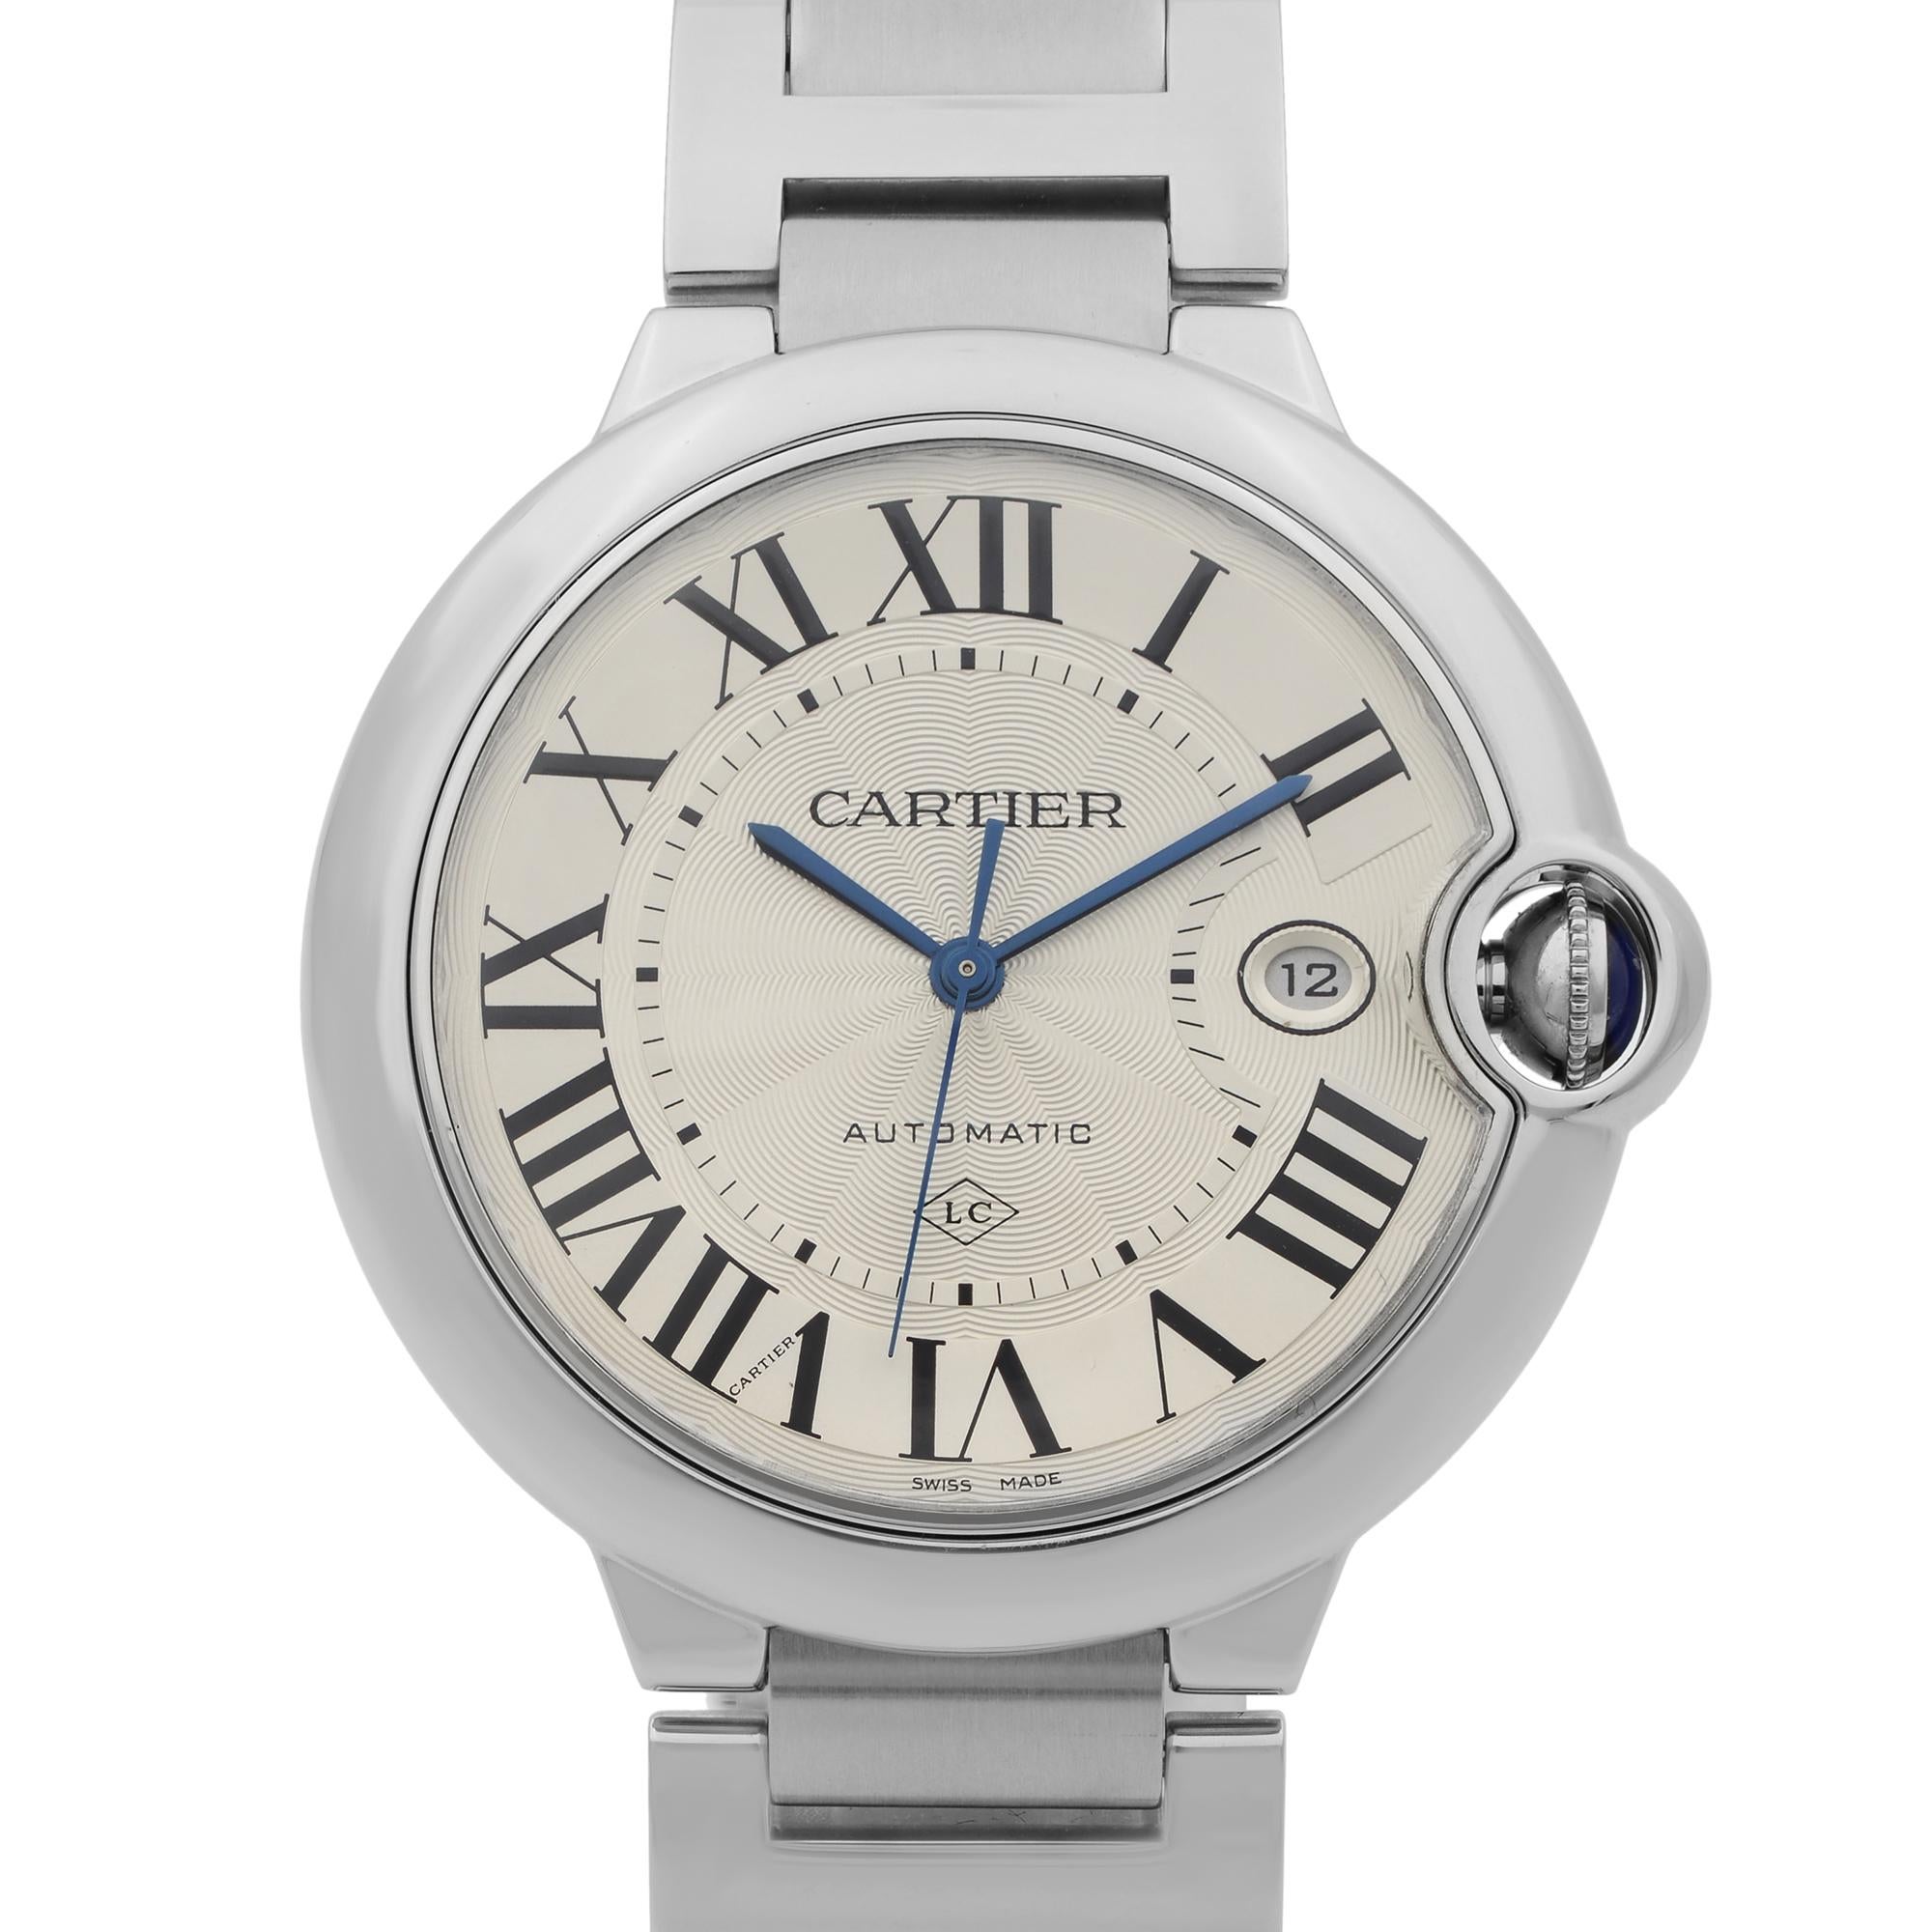 This pre-owned Cartier  Ballon Bleu De Silver  W69012Z4 is a beautiful men's timepiece that is powered by mechanical (automatic) movement which is cased in a stainless steel case. It has a round shape face, date indicator dial and has hand roman